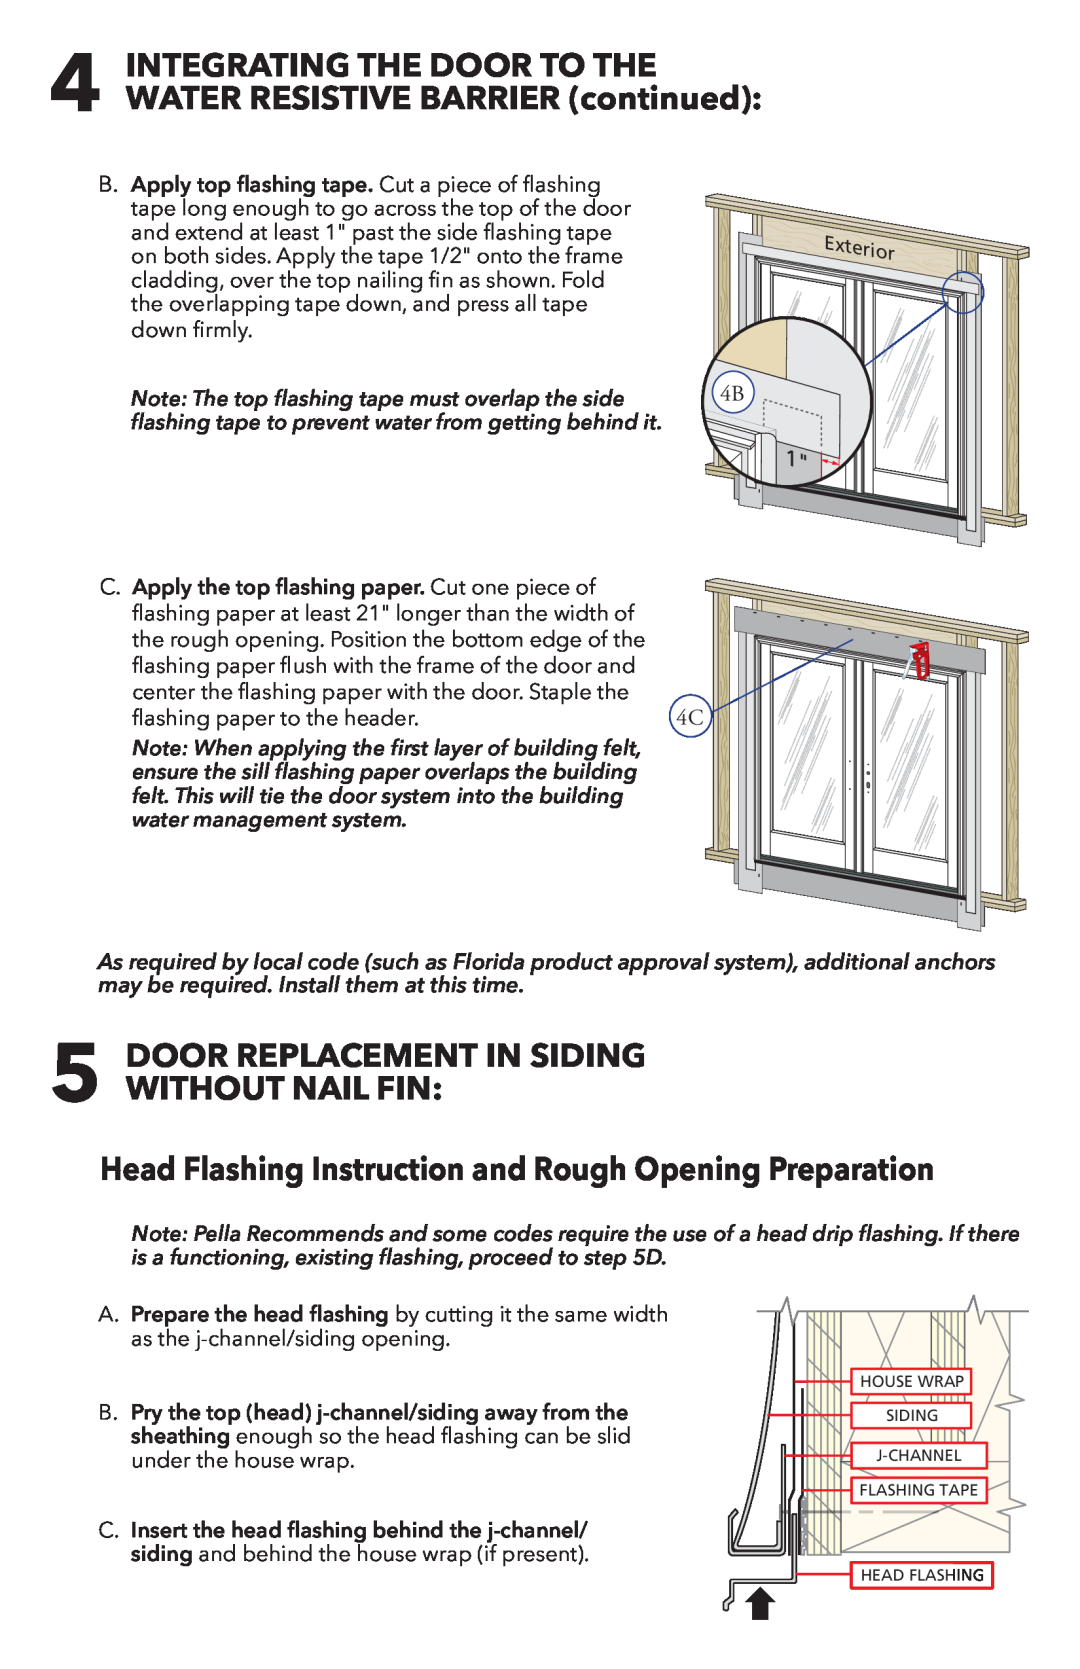 Pella 81DU0100 Door Replacement In Siding Without Nail Fin, Head Flashing Instruction and Rough Opening Preparation 